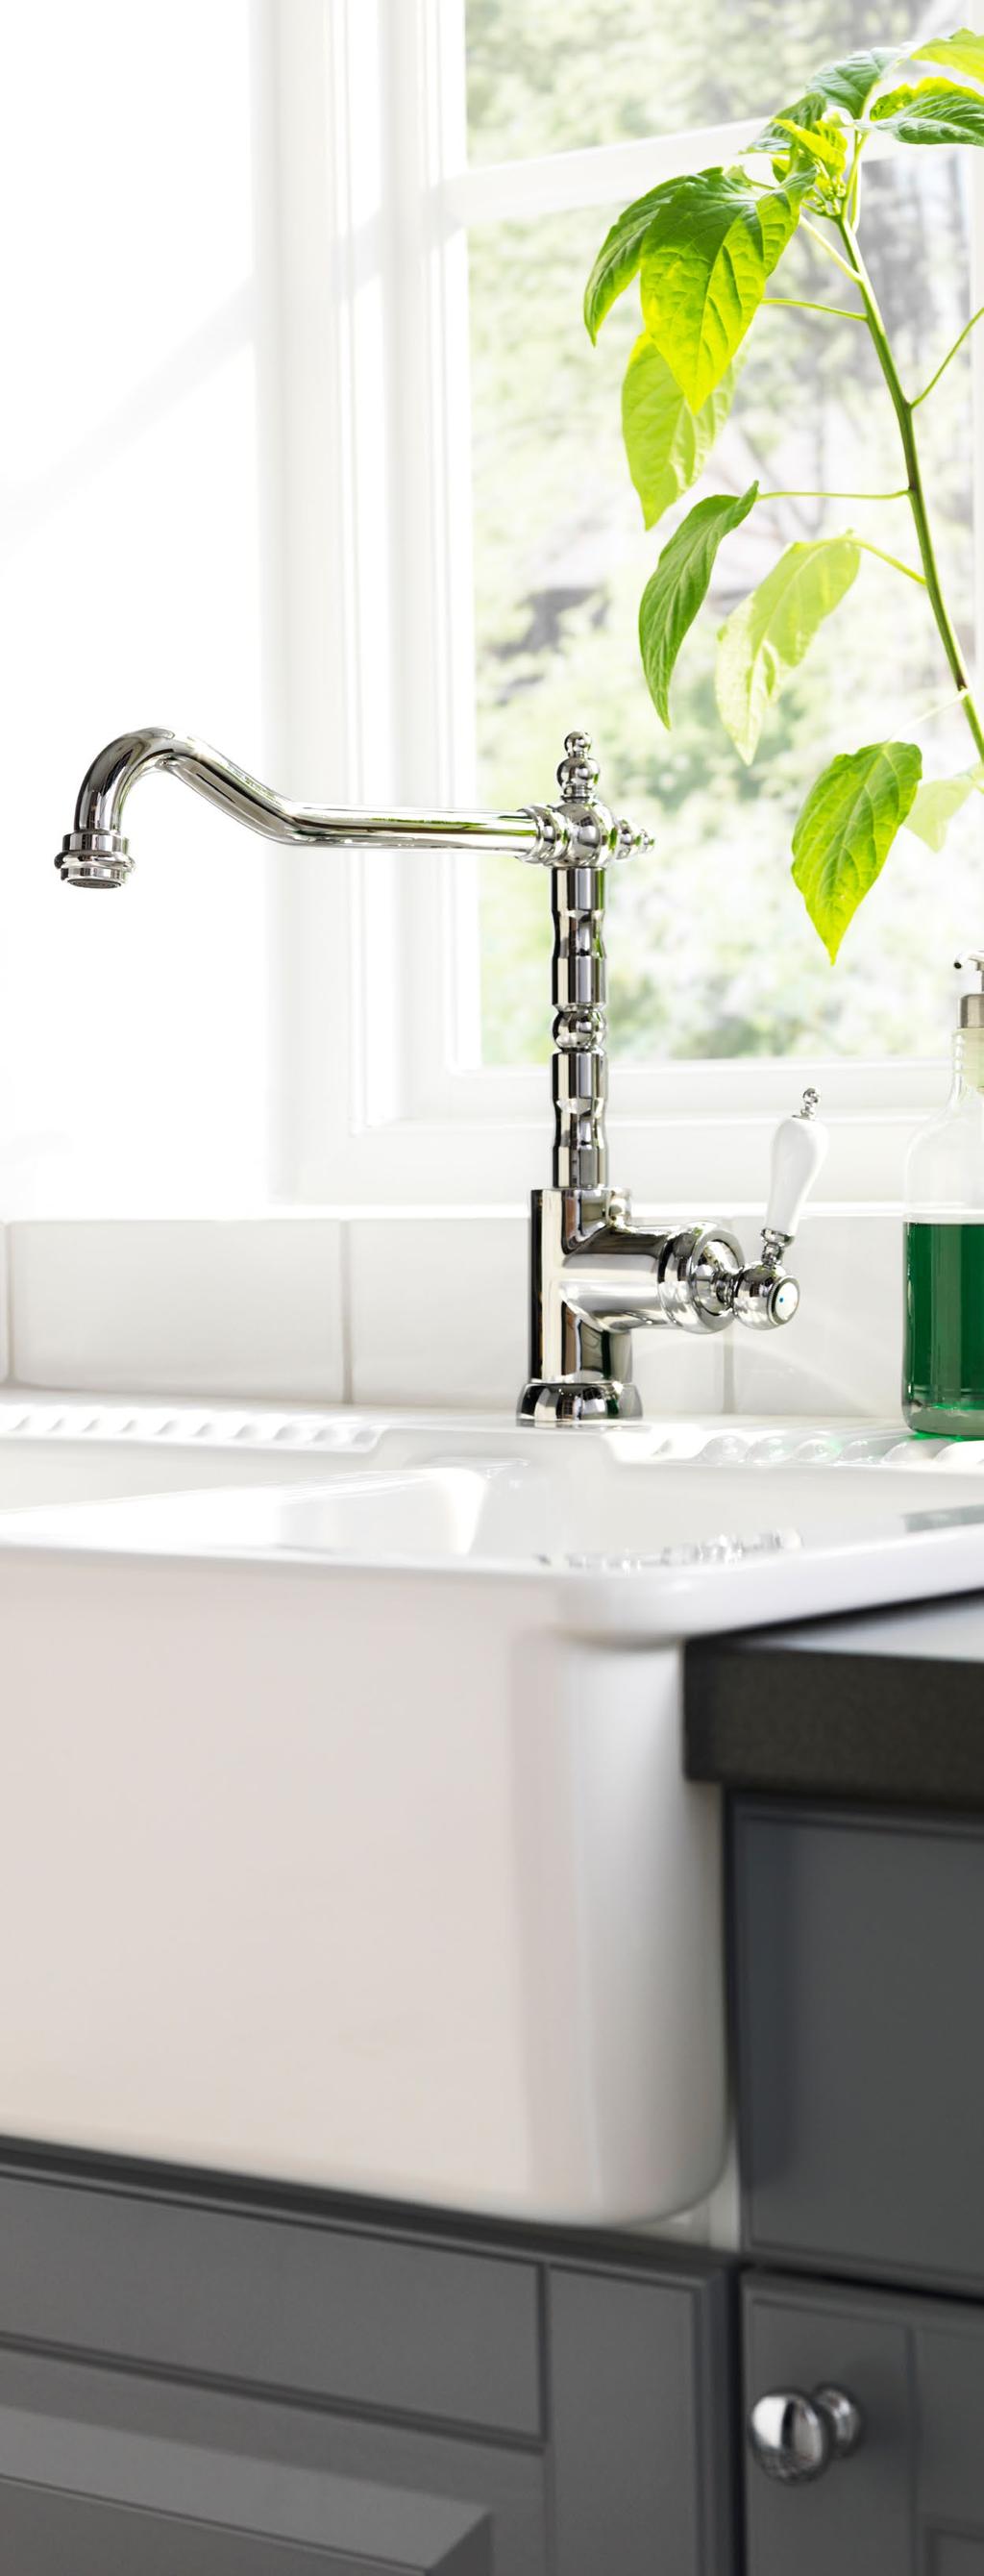 Some of our top mounted sinks can even be ordered as under-glued sinks in a custommade worktop.